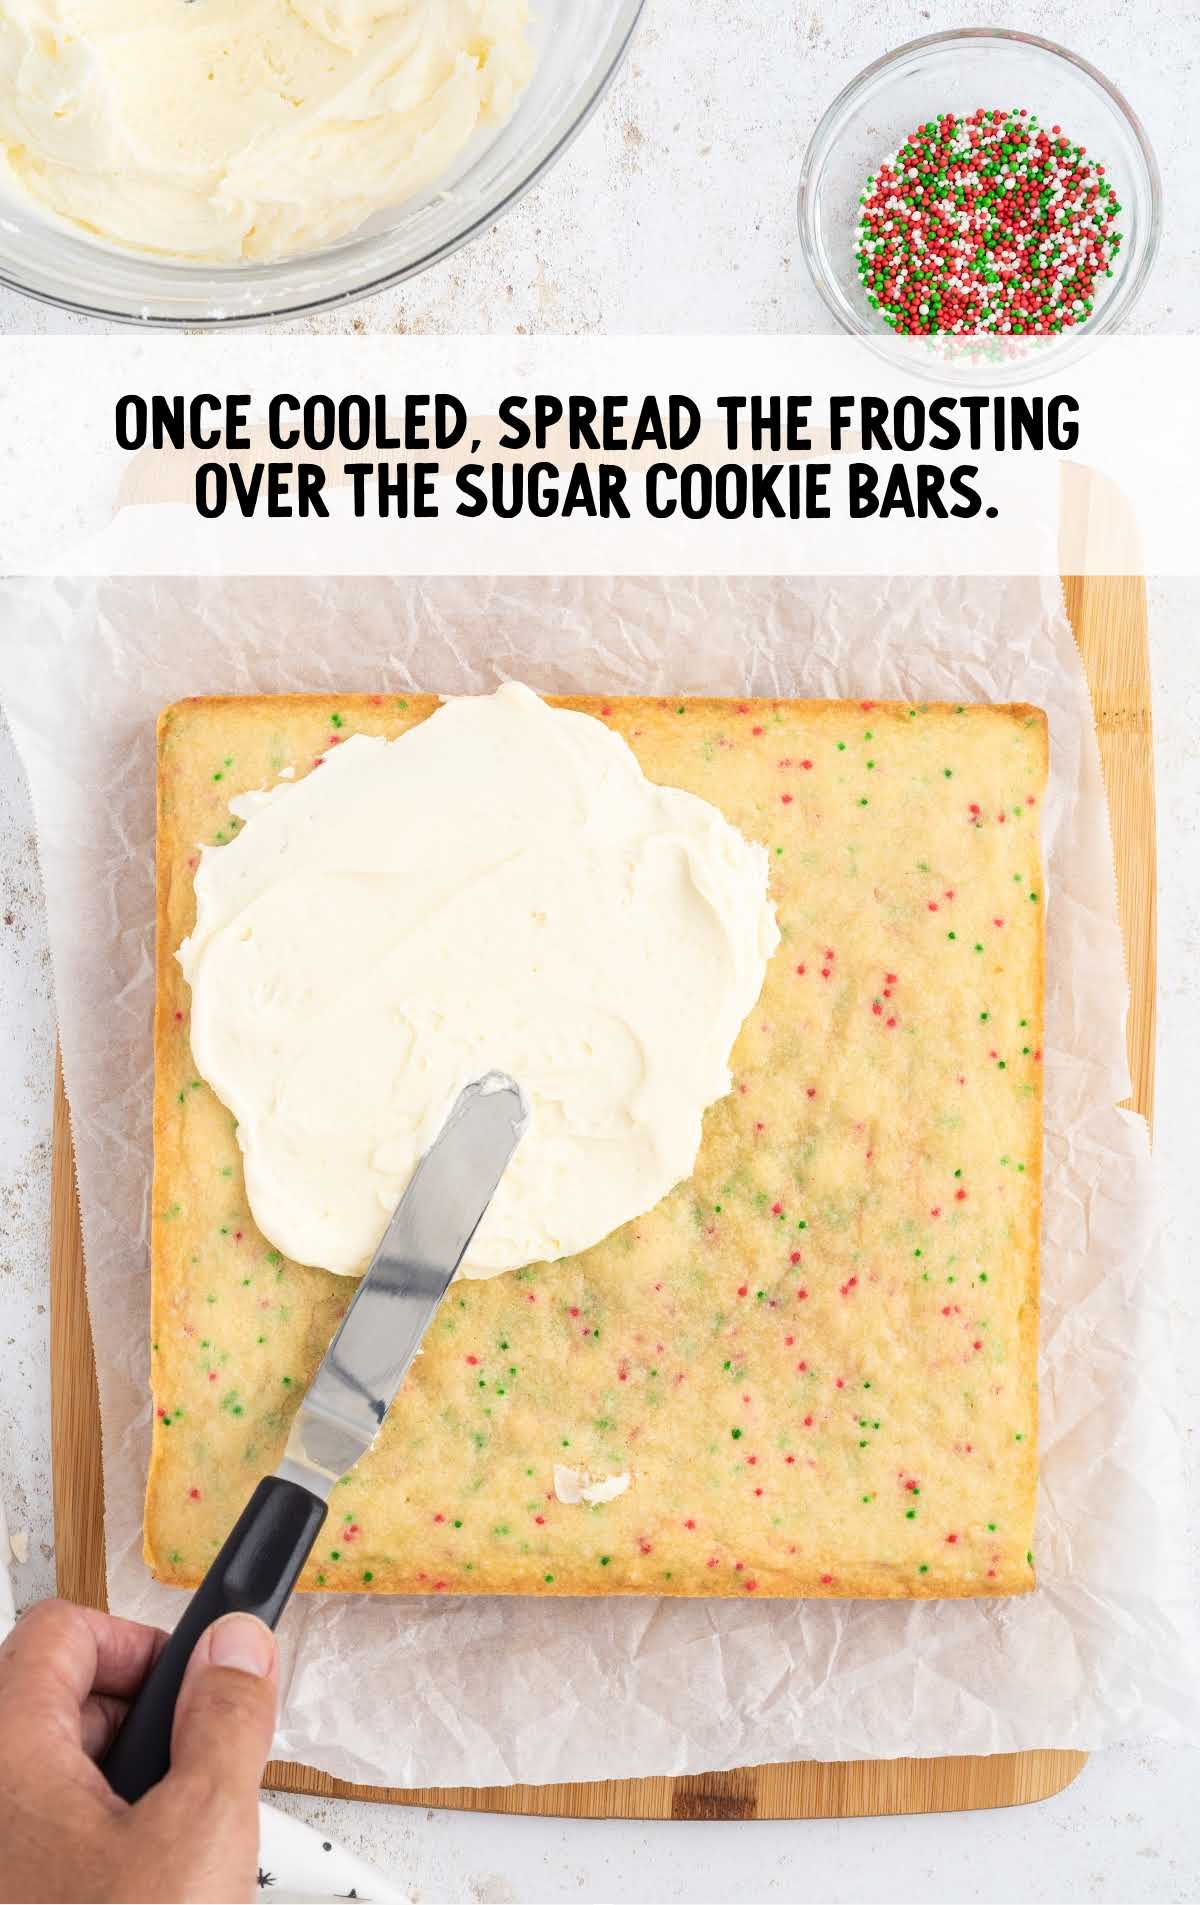 using knife spread frosting over the sugar cookie bars on a wooden board